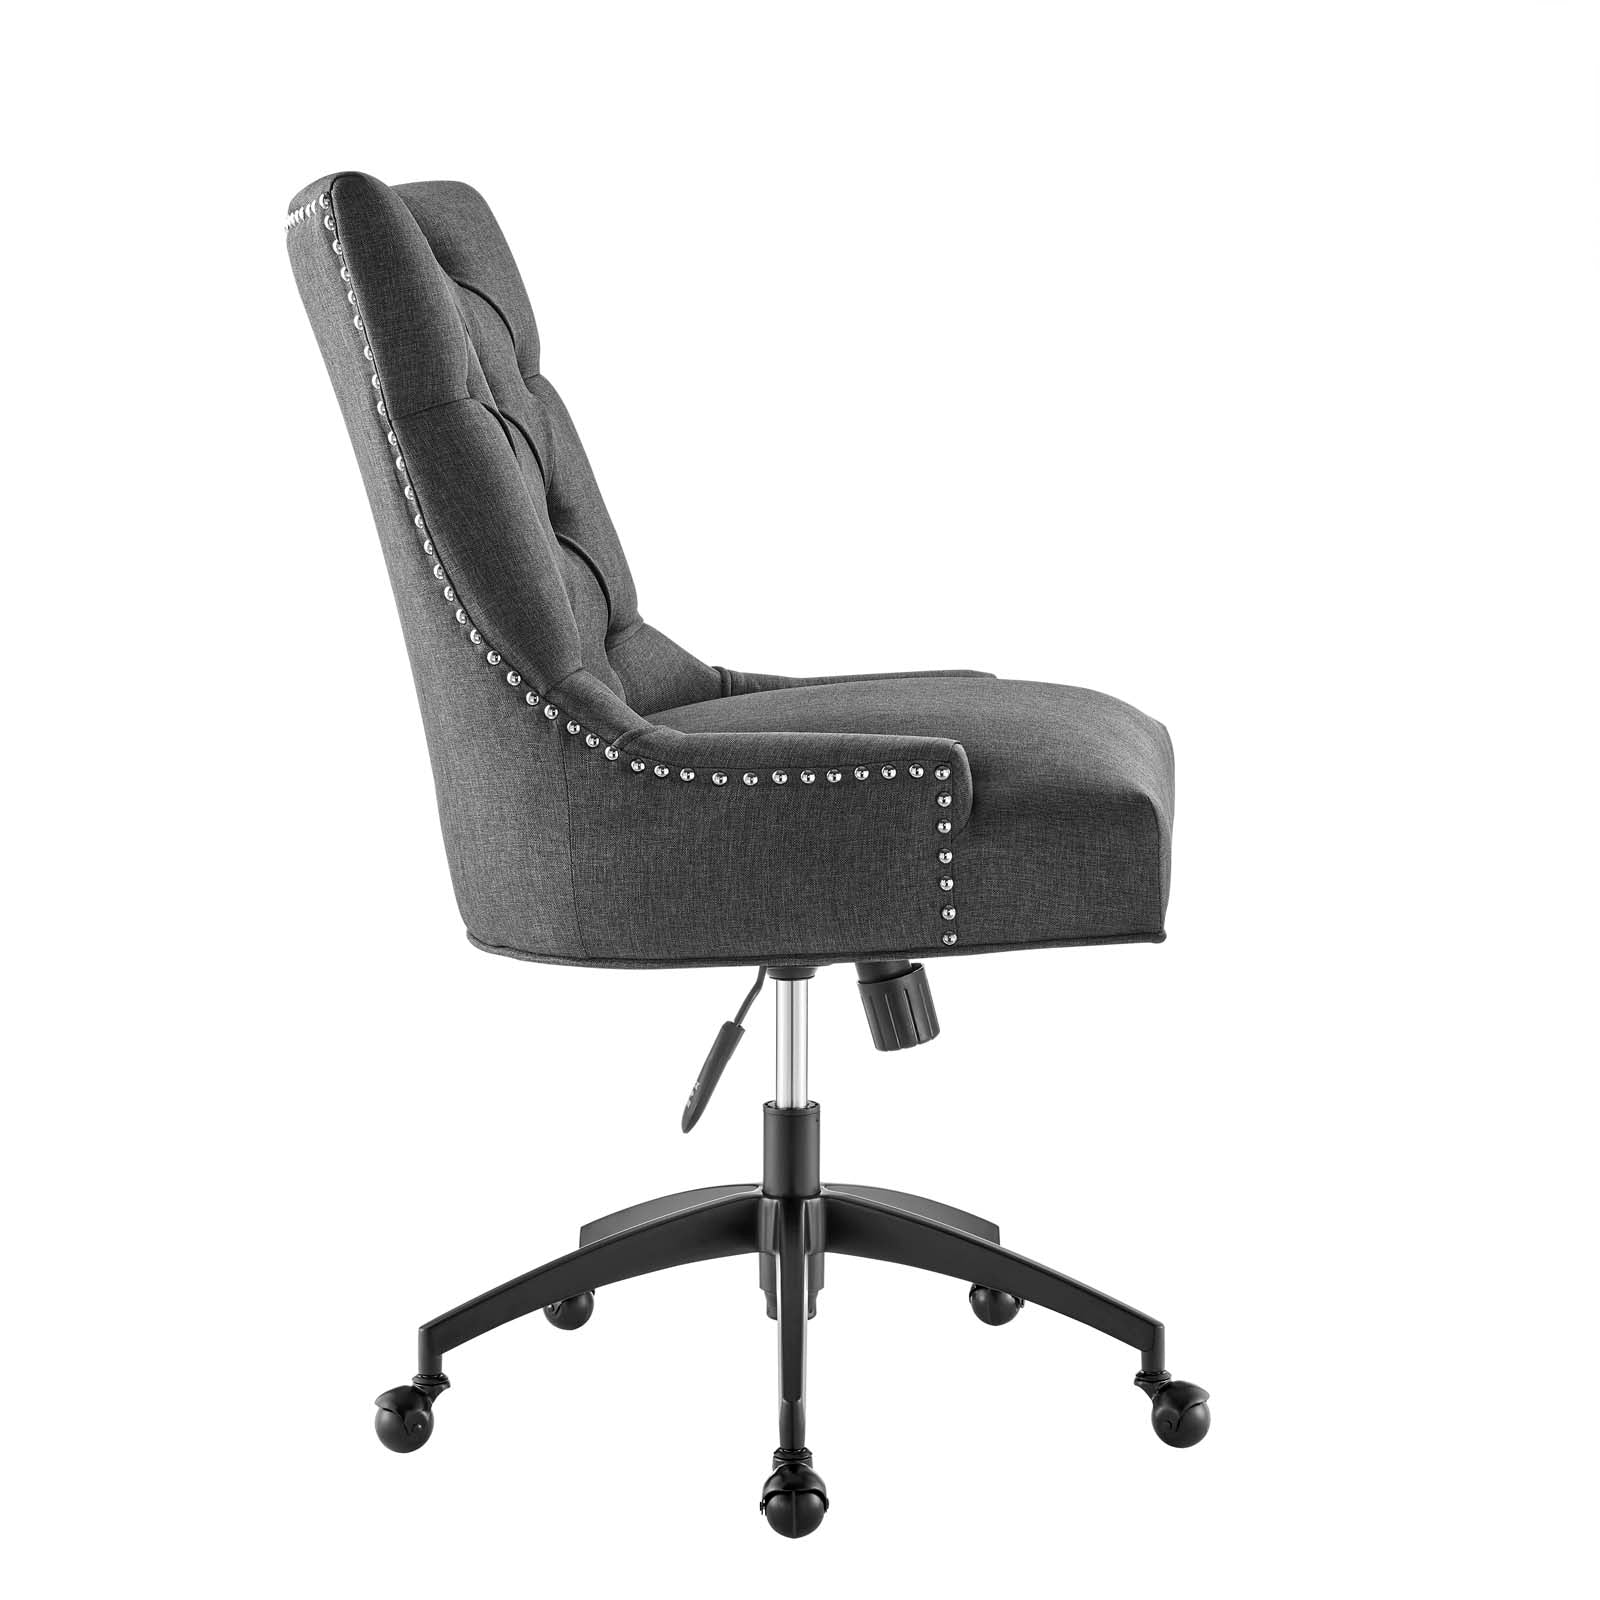 Modway Task Chairs - Regent Tufted Fabric Office Chair Black Gray